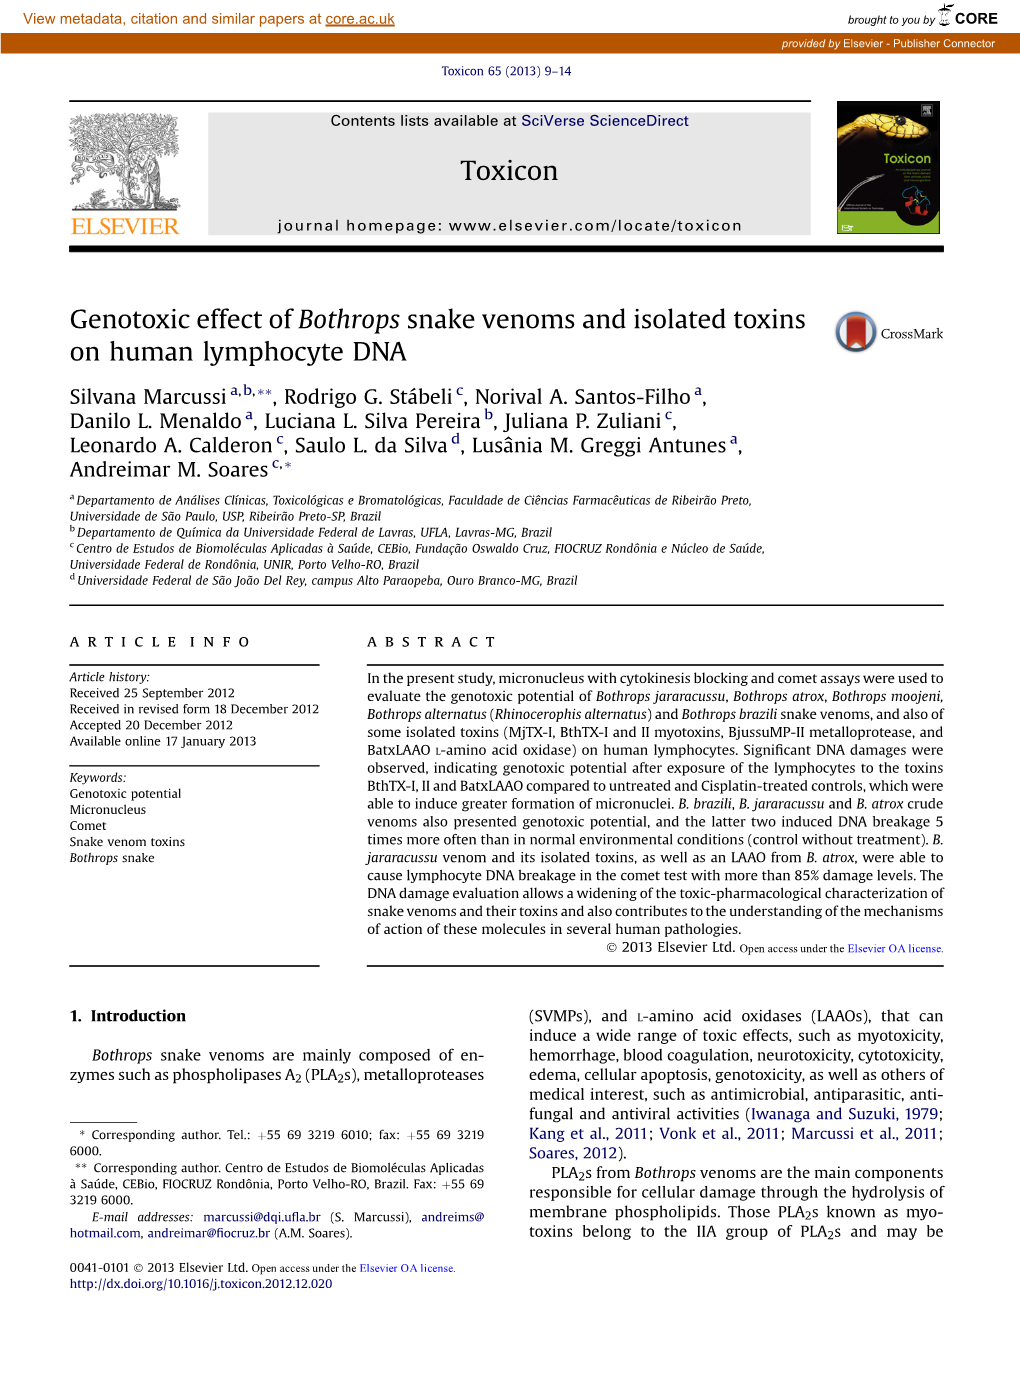 Genotoxic Effect of Bothrops Snake Venoms and Isolated Toxins on Human Lymphocyte DNA